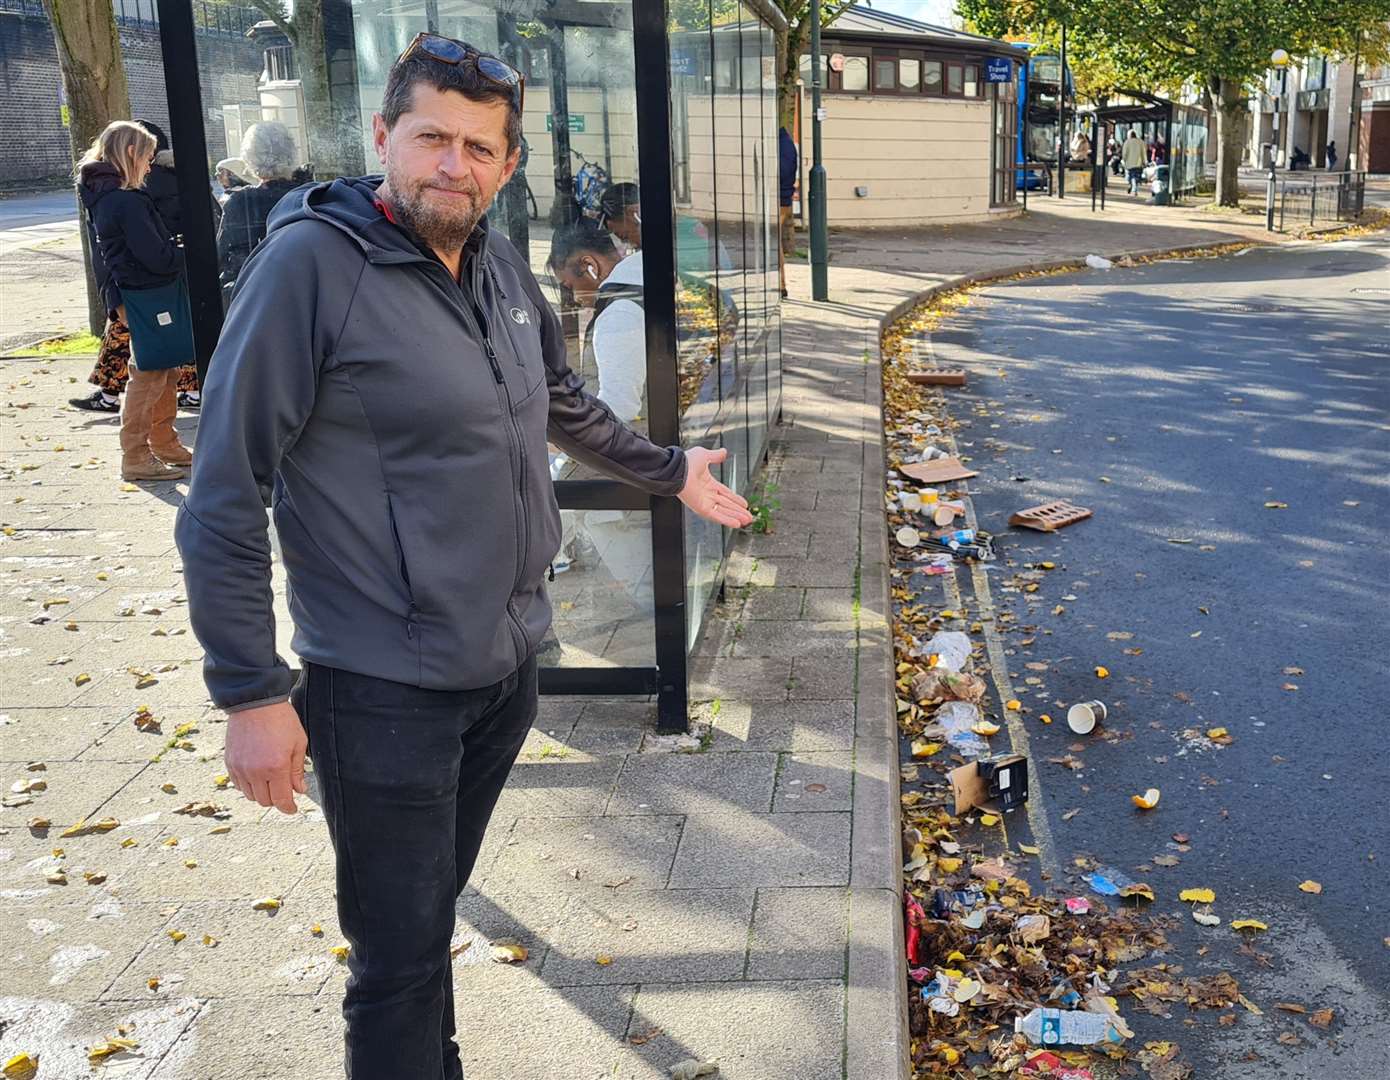 Cycles UK manager Adam Hopkins says the street outside his shop in Canterbury is blighted by litter